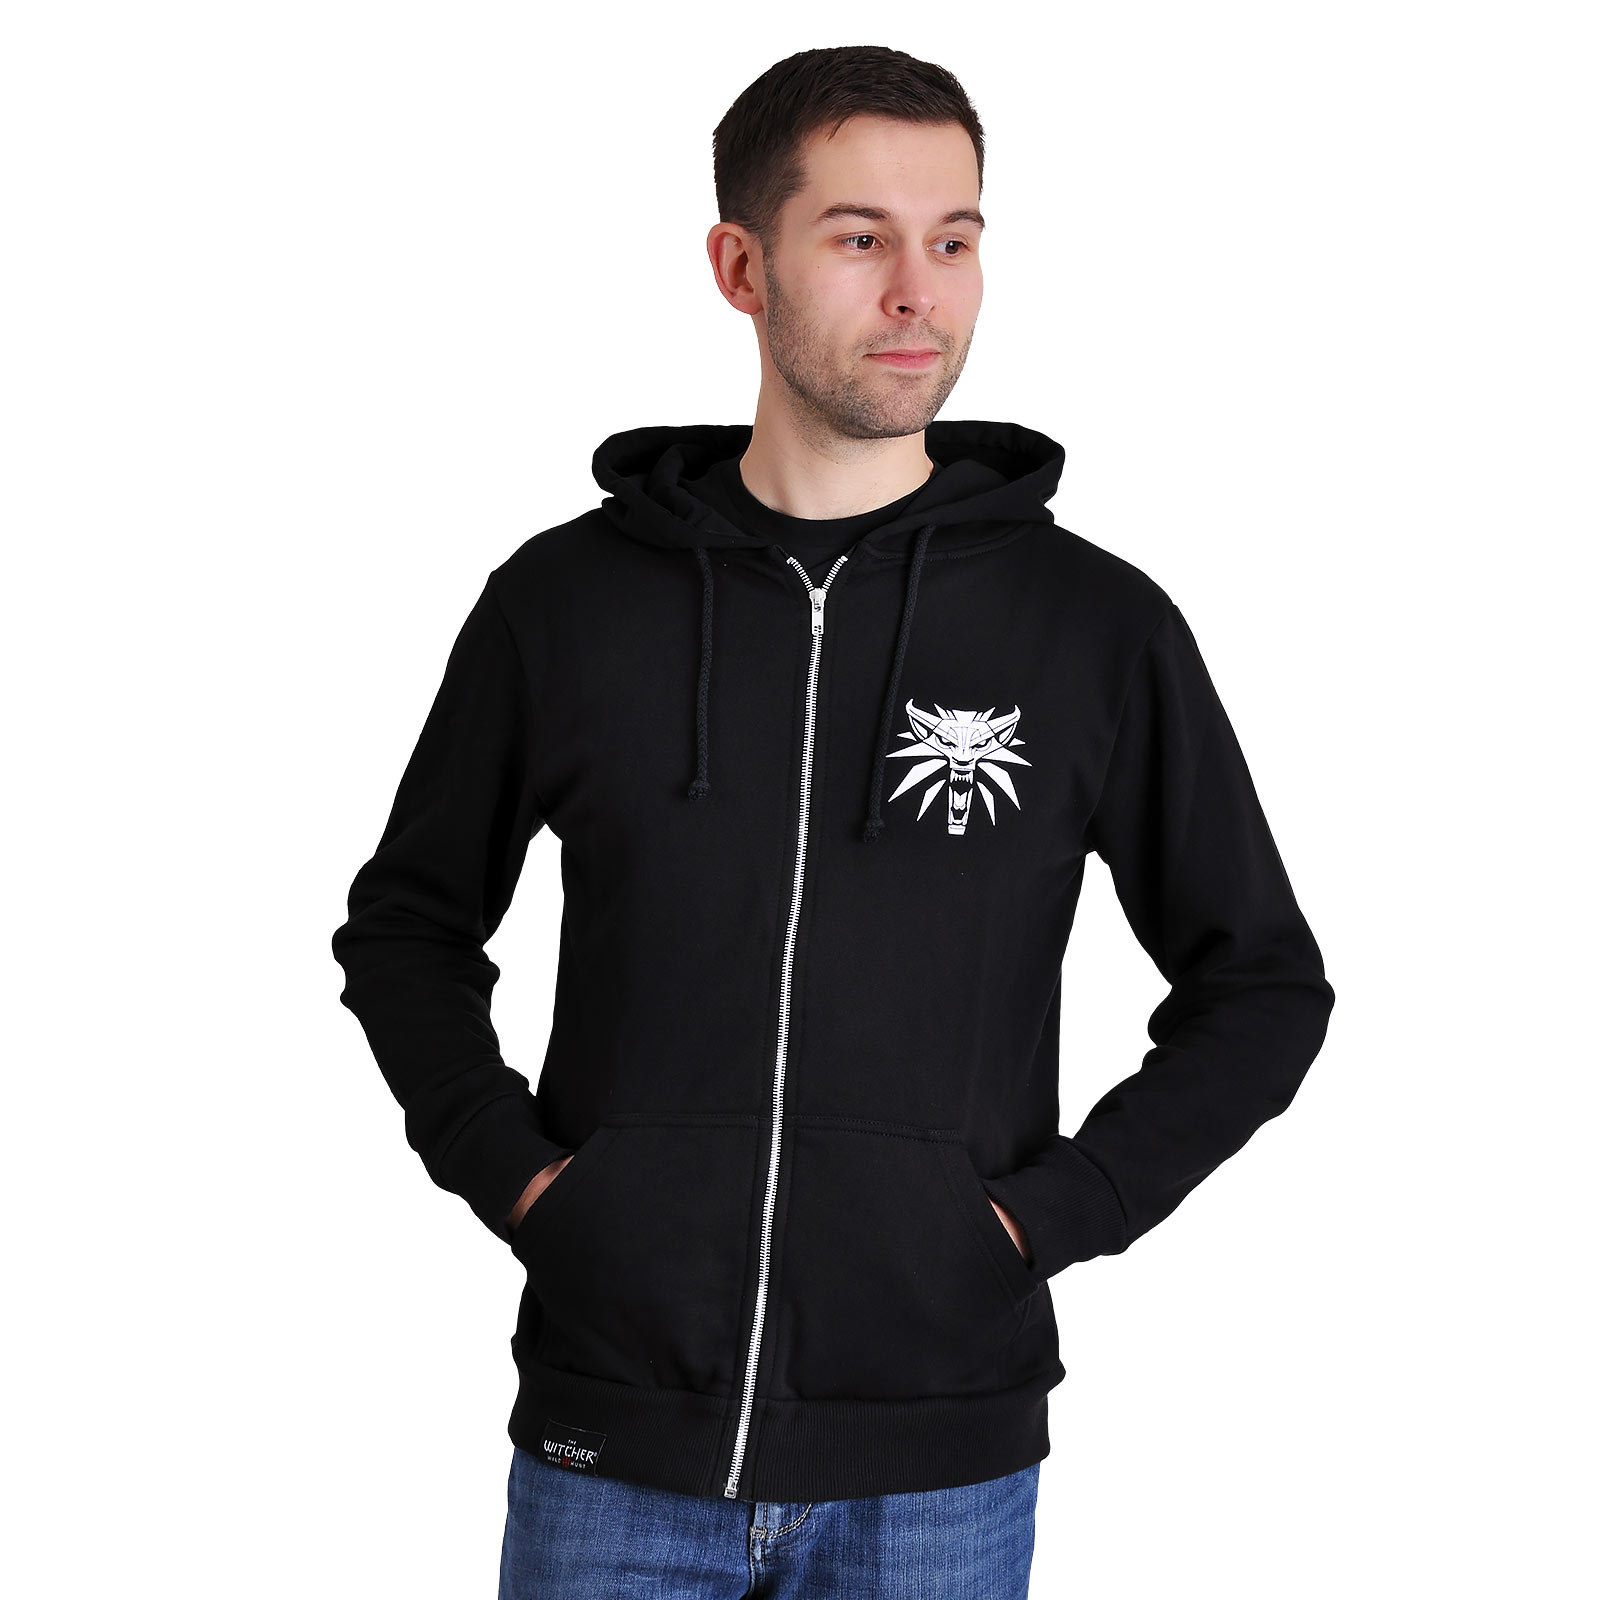 Witcher - Steel and Silver Hoodie Black